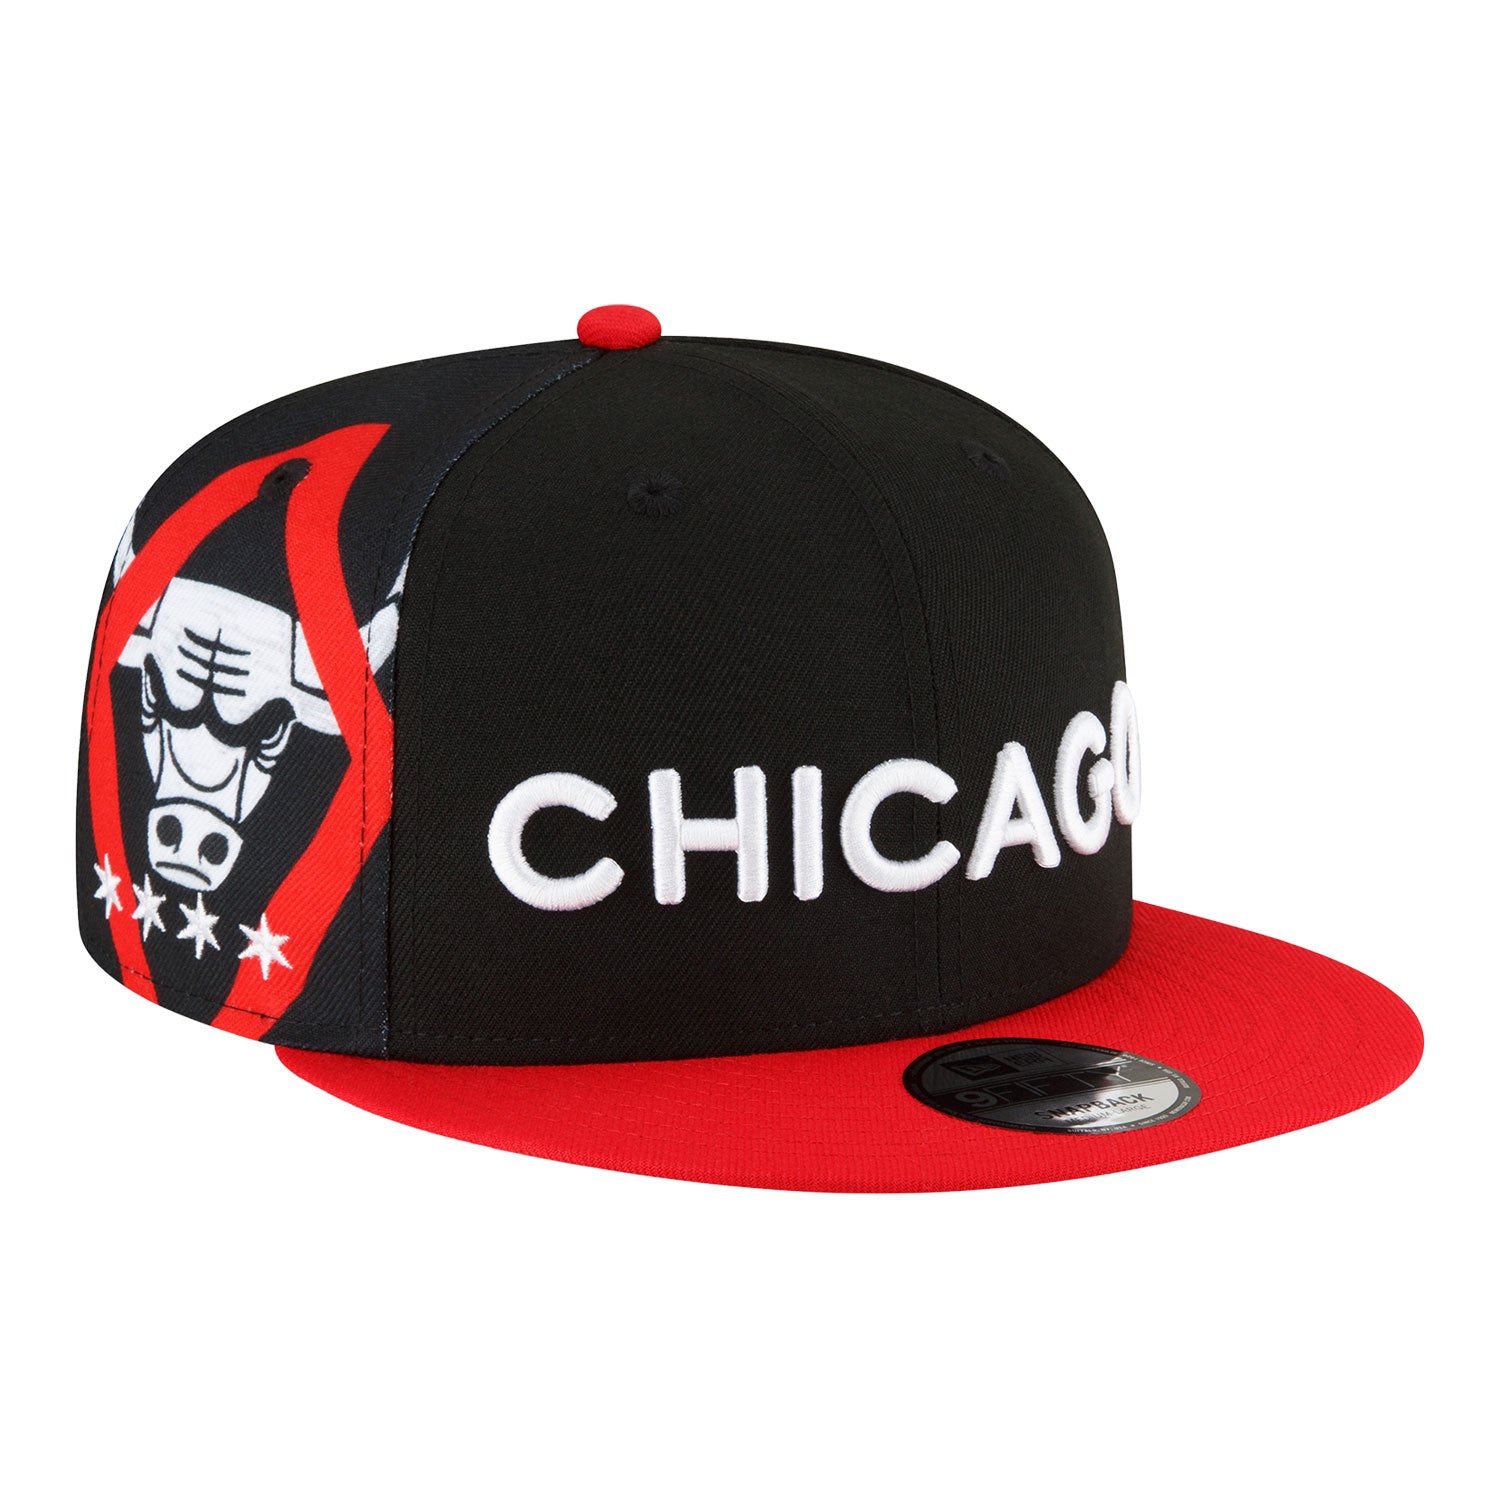 Official Chicago Bulls Hats, Snapbacks, Fitted Hats, Beanies